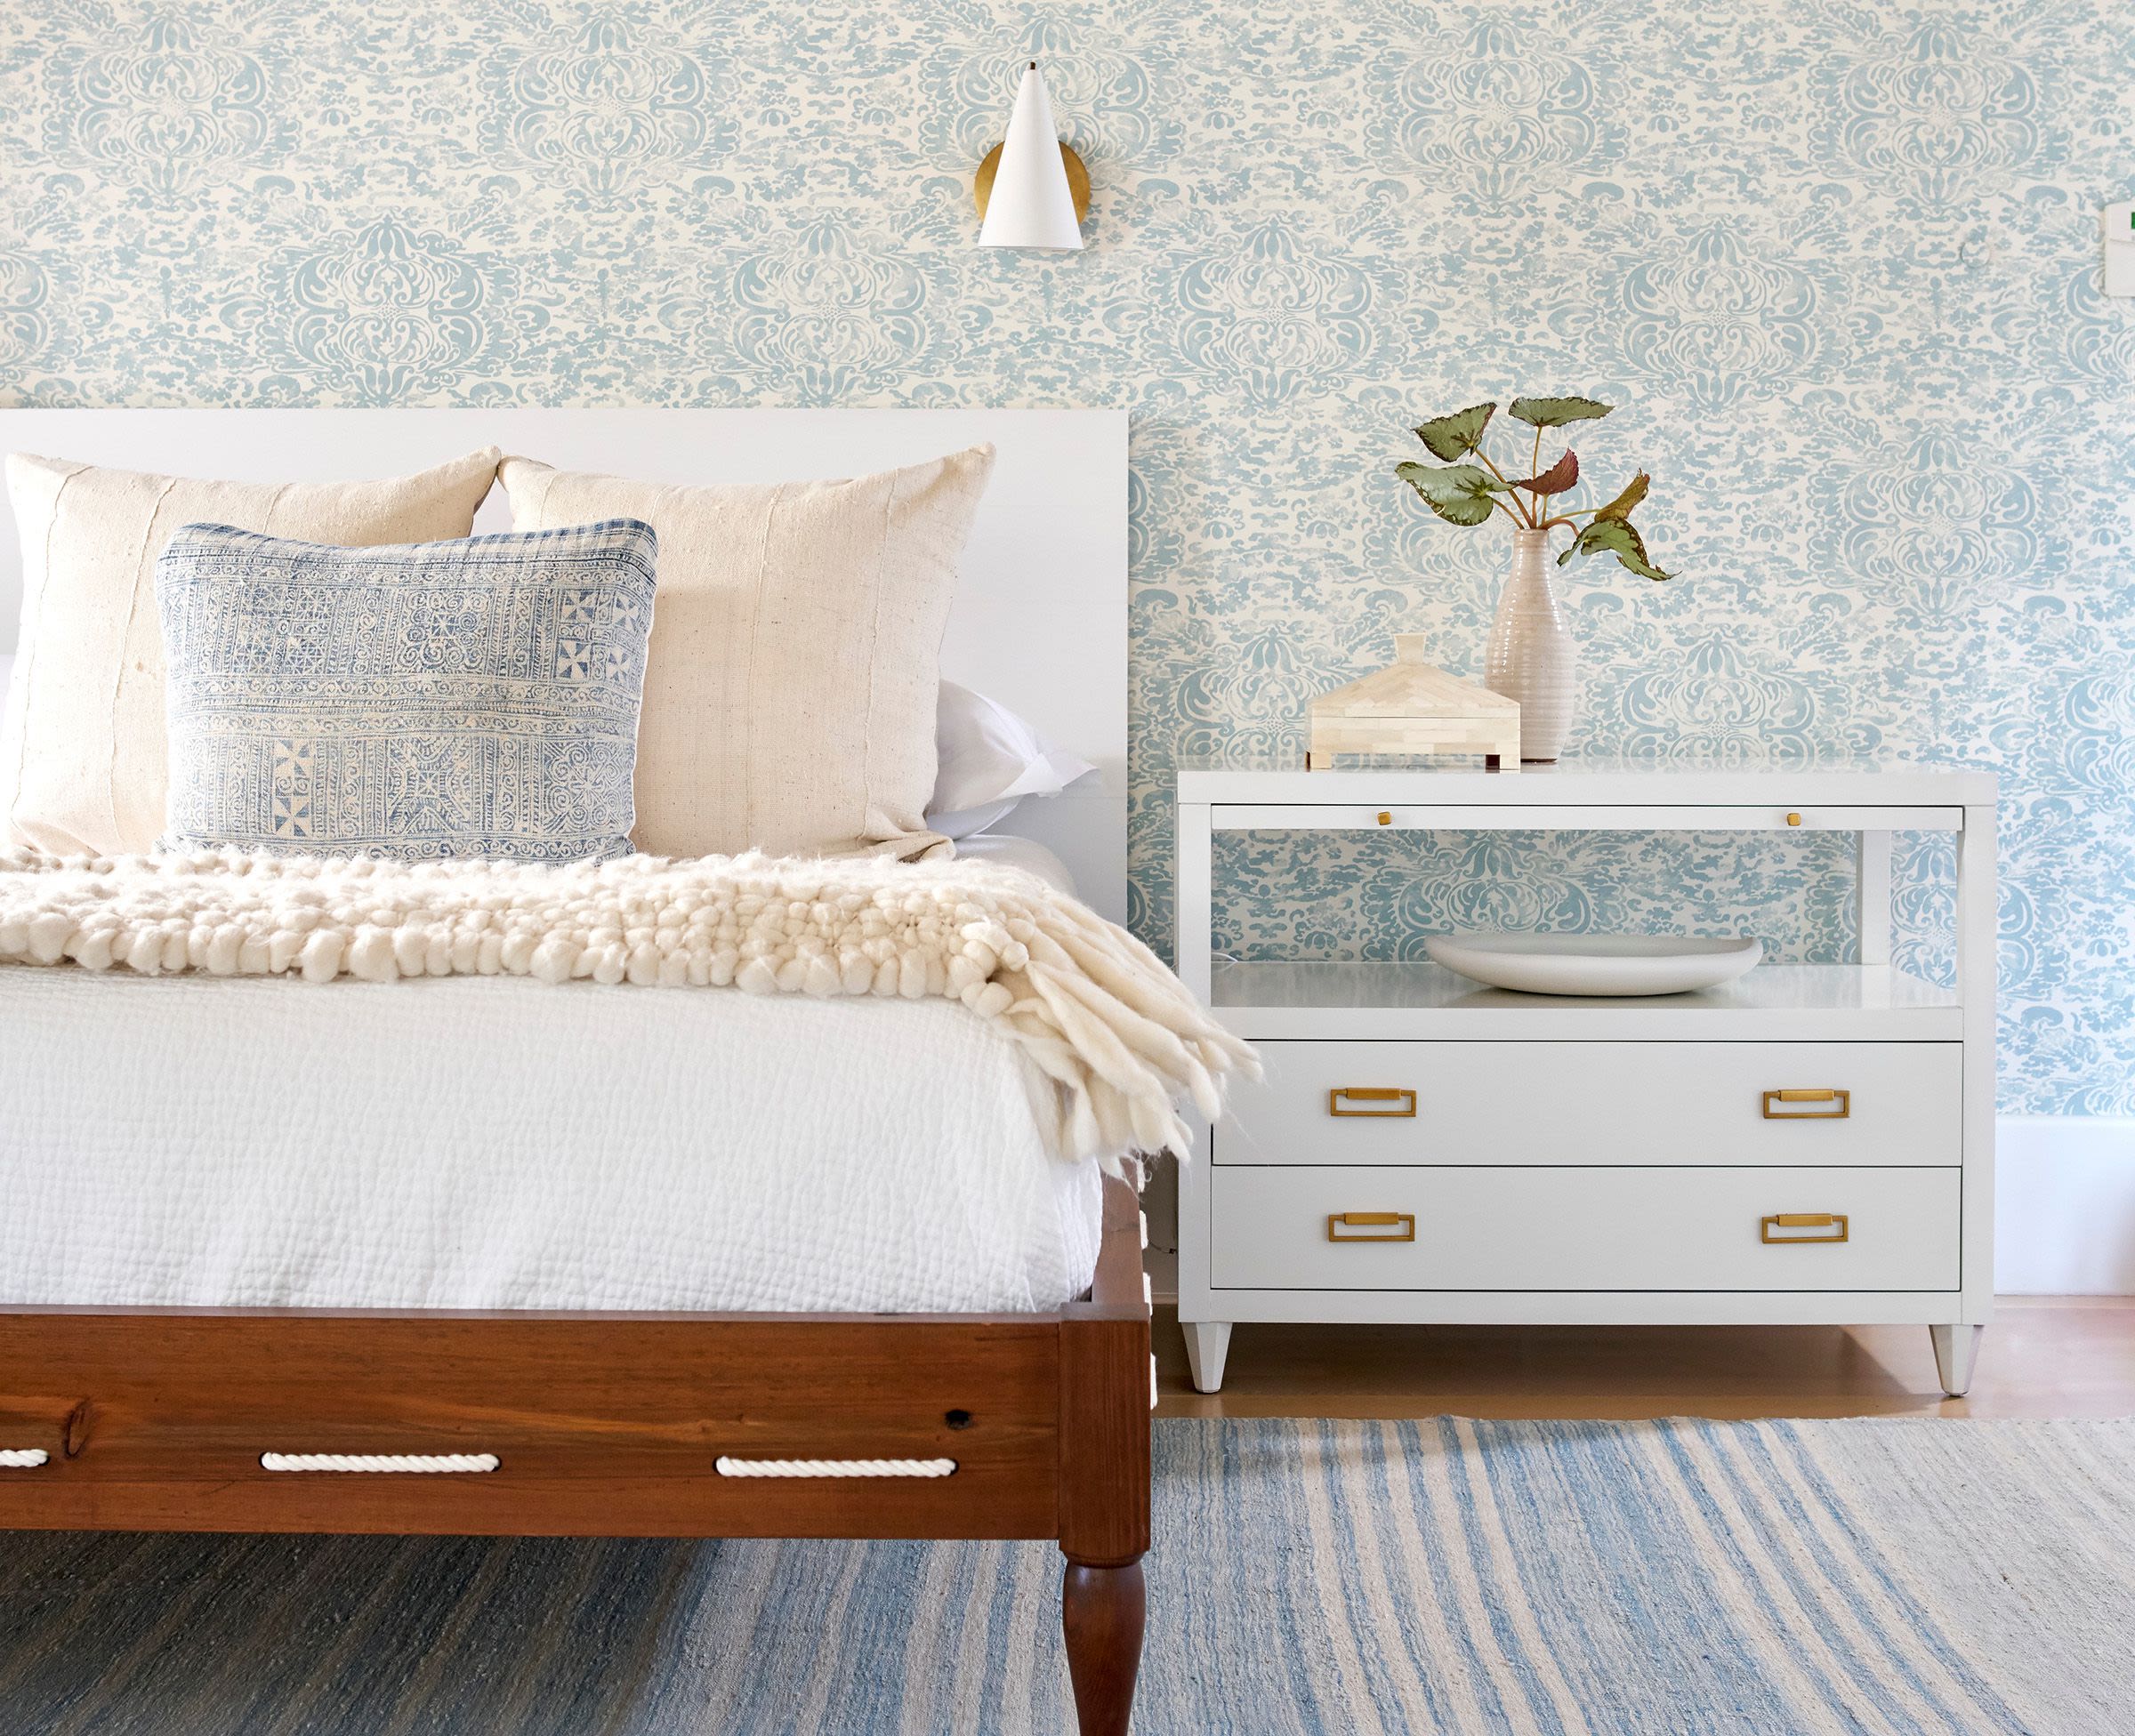 37 Beautiful Bedroom Wallpaper Ideas for Any Design Style